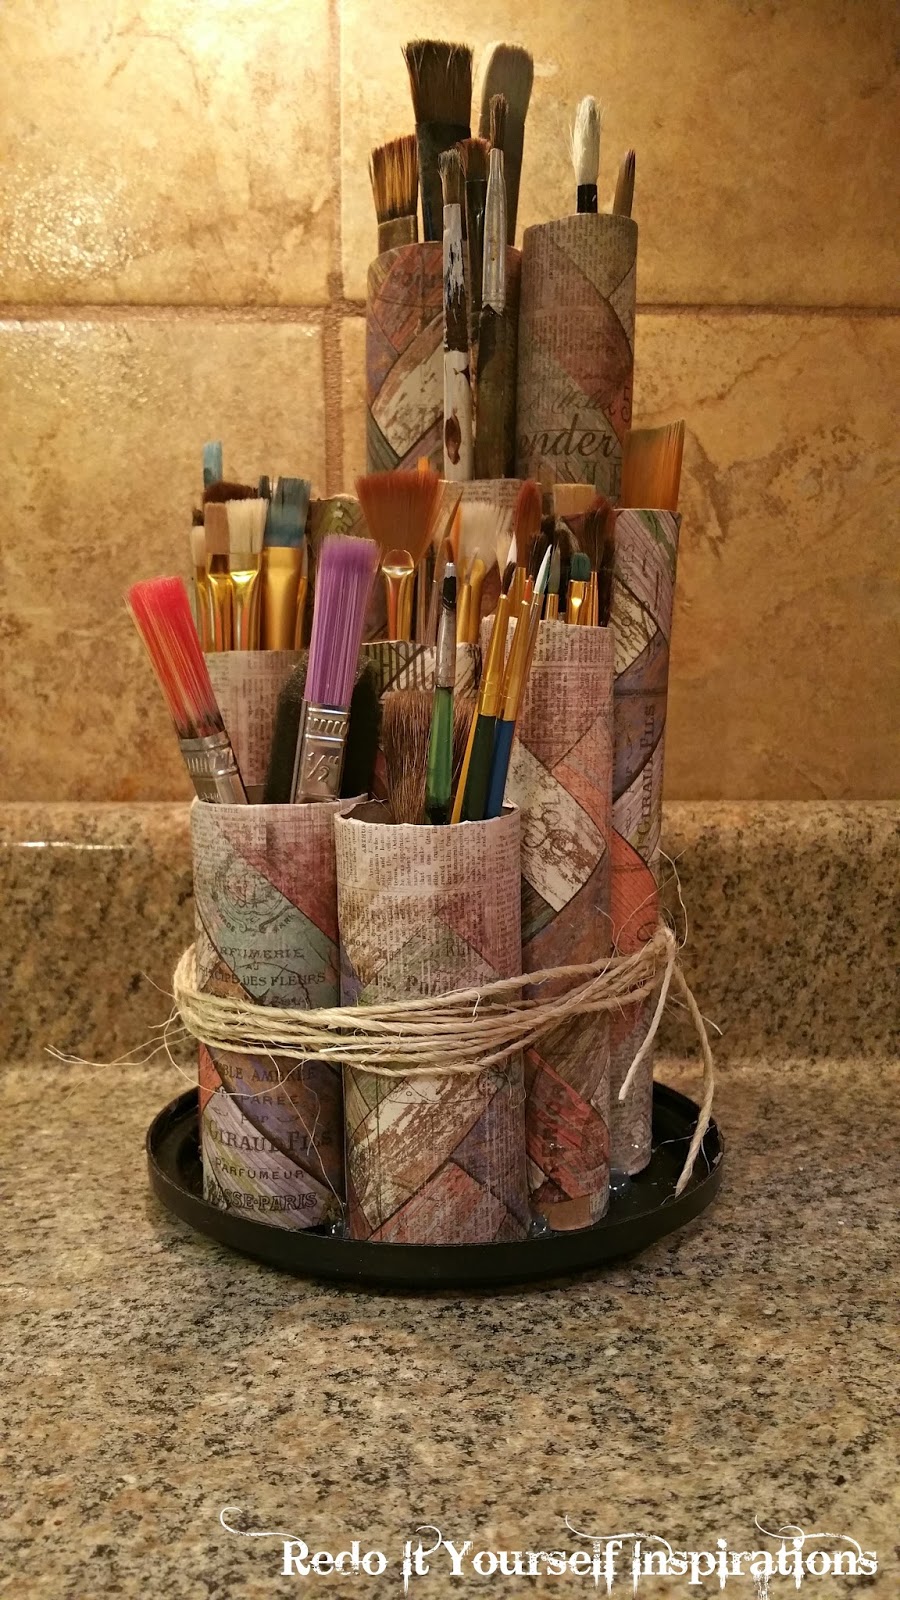 To all the painters here, here is a DIY paintbrush holder - 9GAG